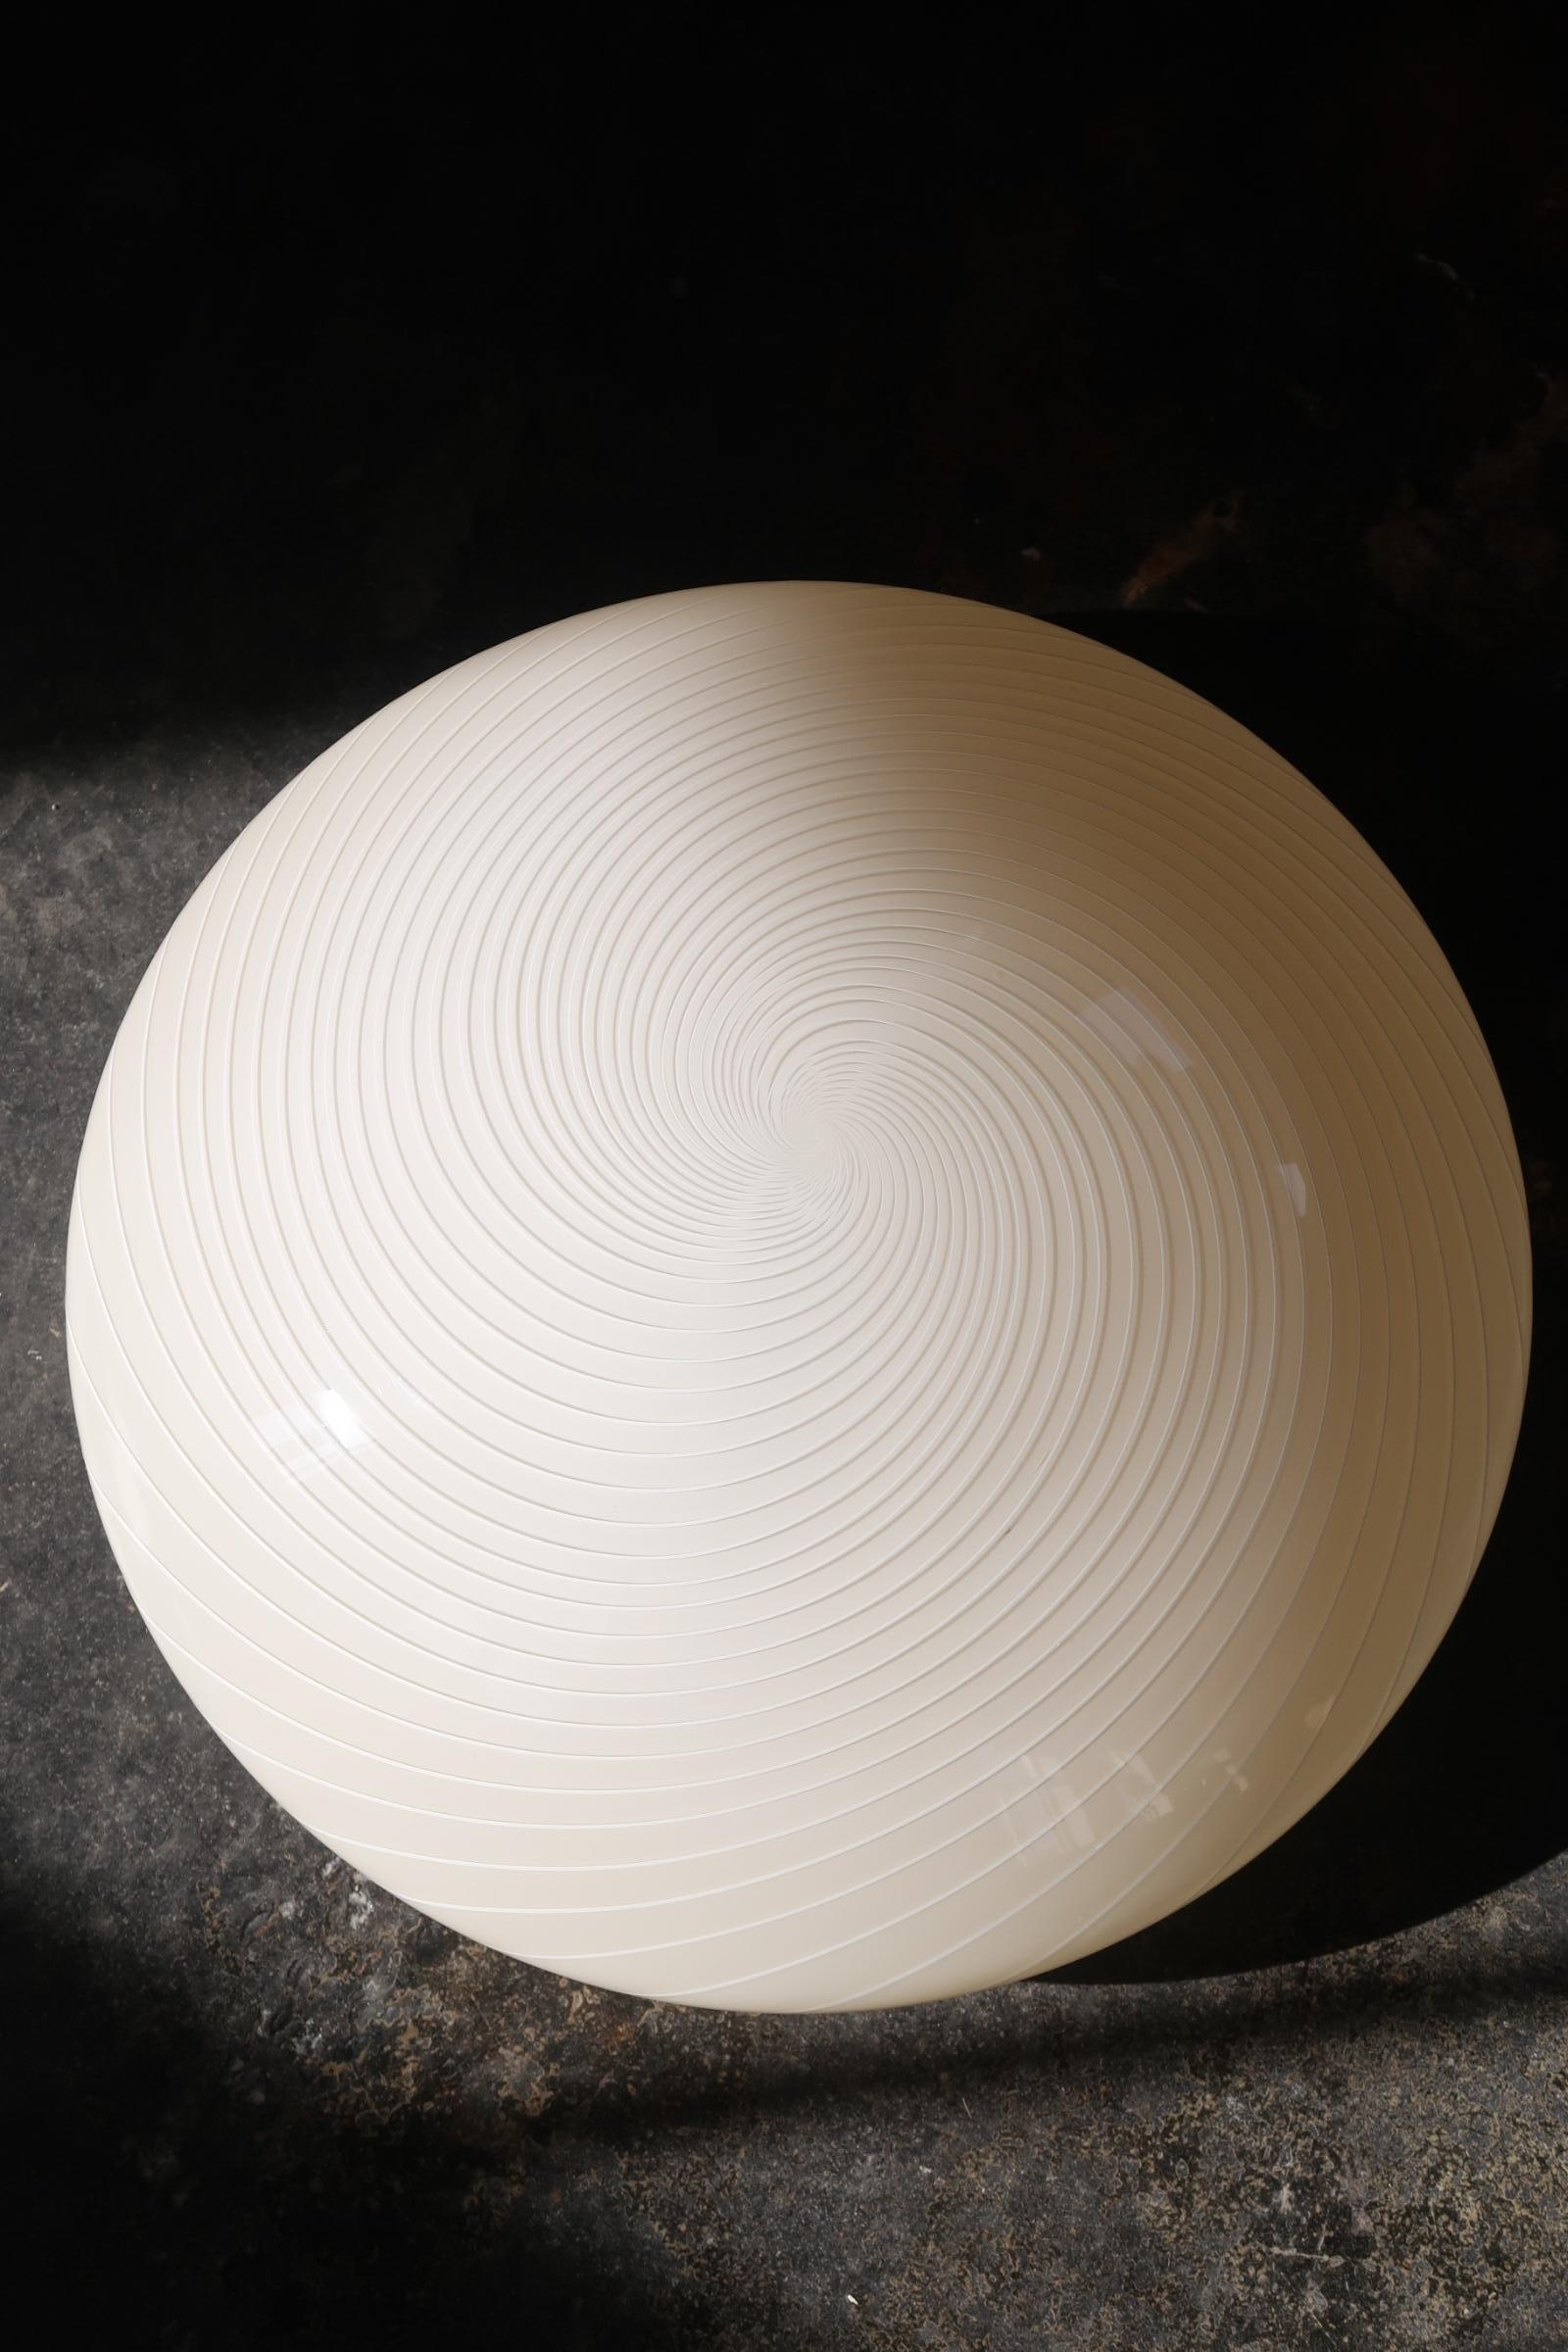 Vintage Murano plafond lamp in beautiful cream glass with white swirl pattern. Can be used both as a ceiling lamp or as a wall lamp. 2x E27 socket. Handmade in Italy, 1970s, and has a white metal flat suspension.
D: 40 cm H: 17 cm